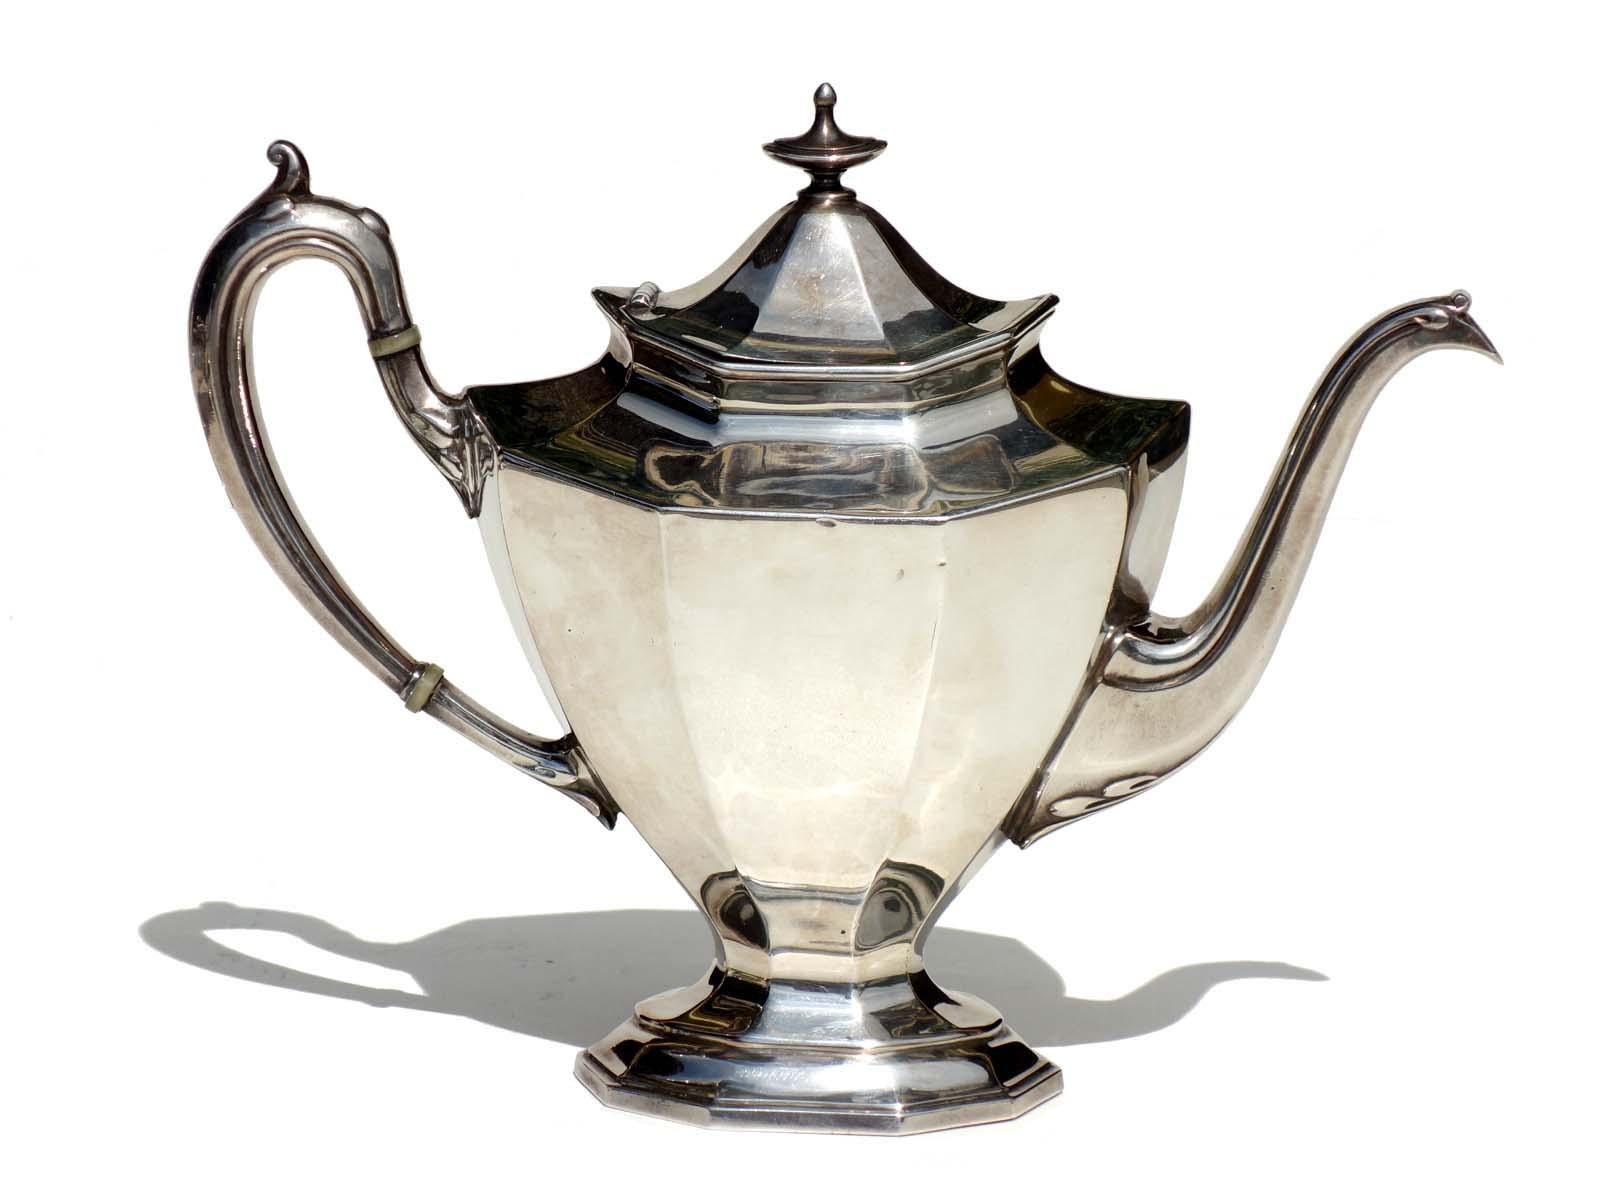 A Reed & Barton silver plate, five-piece tea and coffee service. This set includes a creamer, a lidded sugar bowl, a waste bowl, a coffee pot, and a teapot. All pieces are hallmarked to the bottom.

Measures: Teapot: H 28 x 25 x 13 cm
Coffeepot: